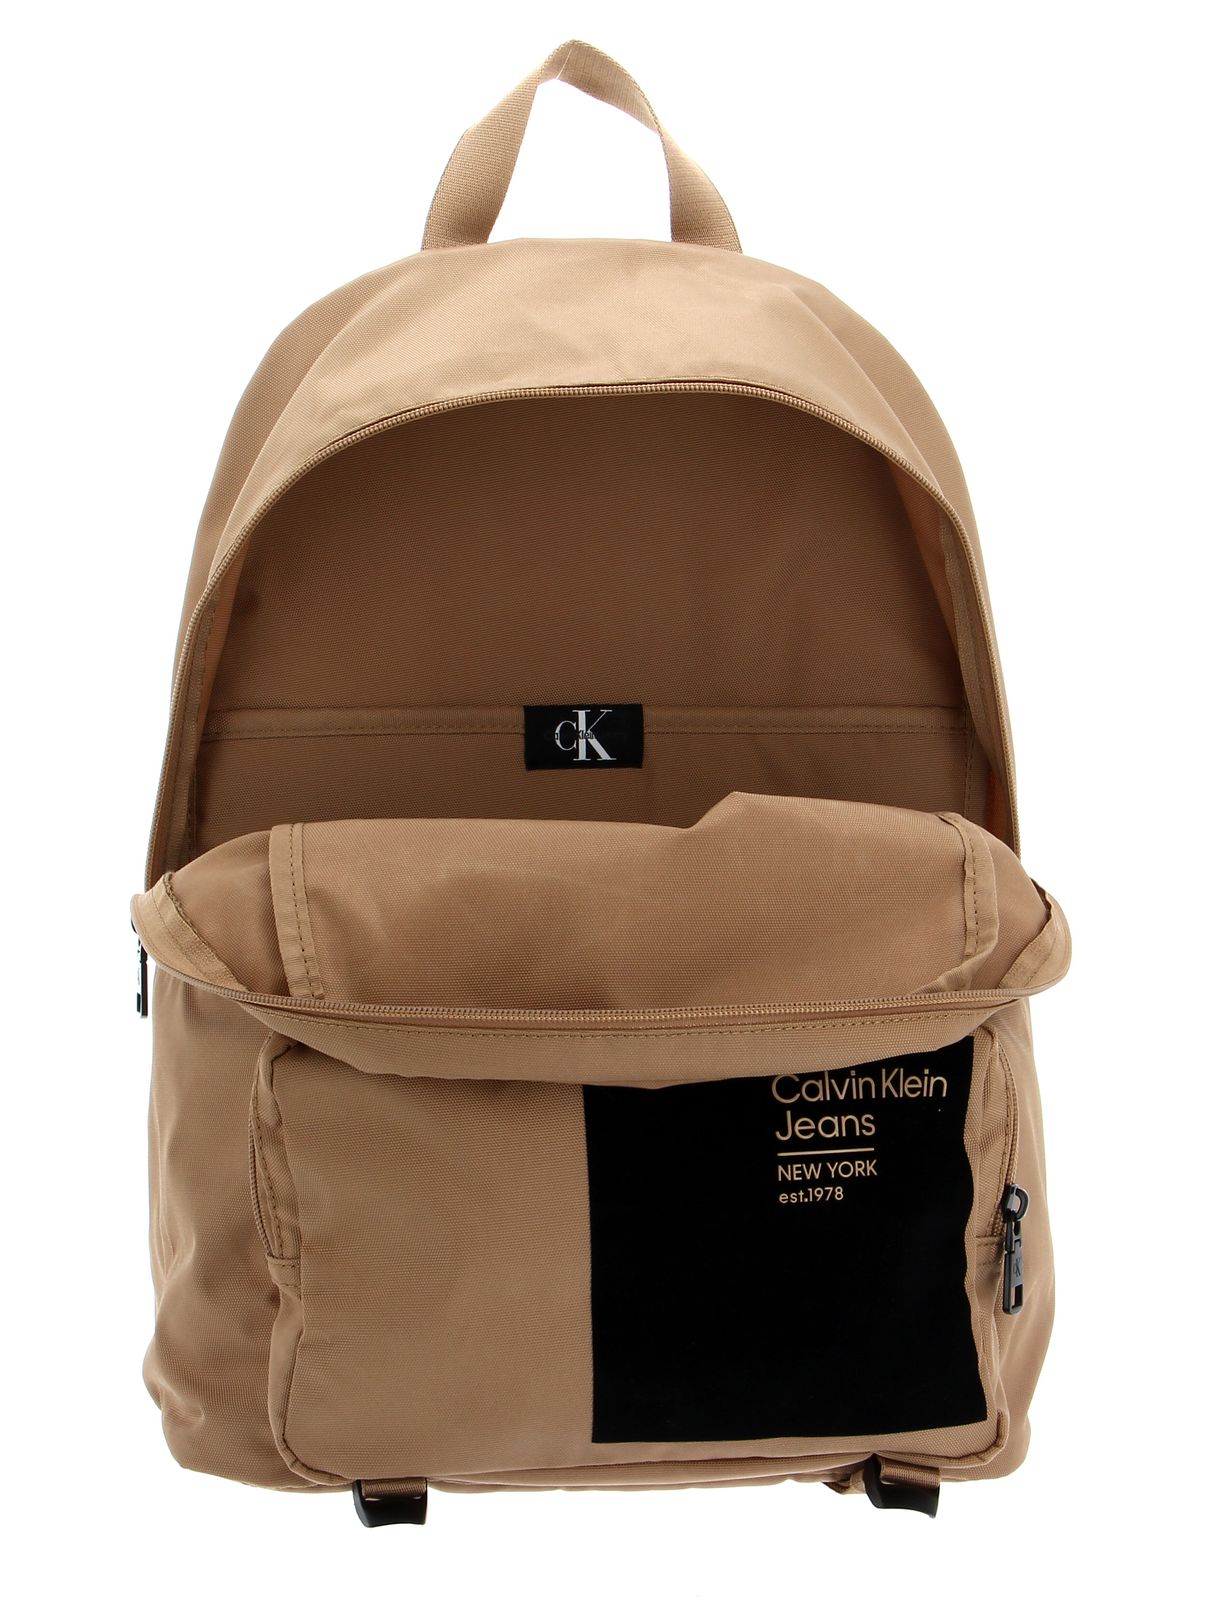 Calvin Klein backpack Campus BP43 SQ Timeless Camel | Buy bags, purses &  accessories online | modeherz